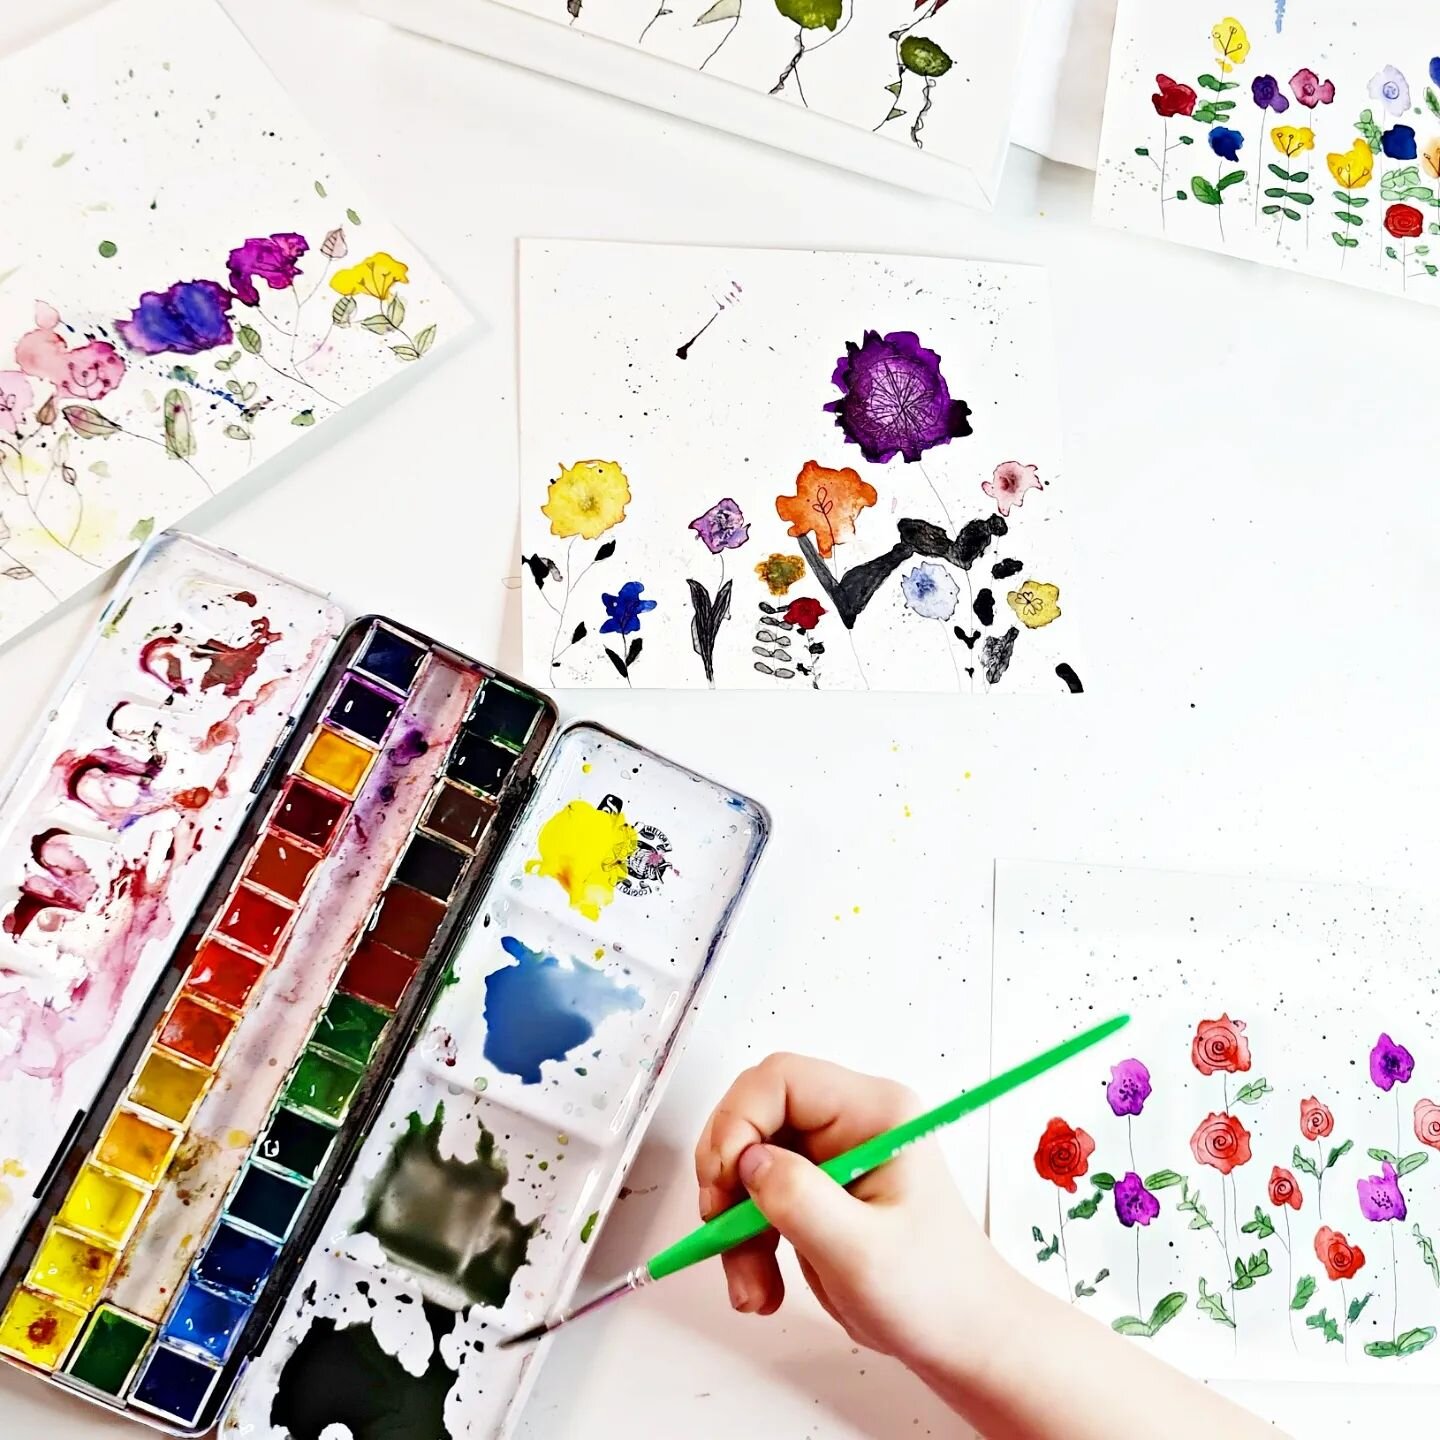 The girls have finished their second tutorial. In their new post, they show how easy it is to paint a beautiful wildflower meadow with watercolor. With a simple trick, every child is an artist. They also think about what wildflowers mean for people a